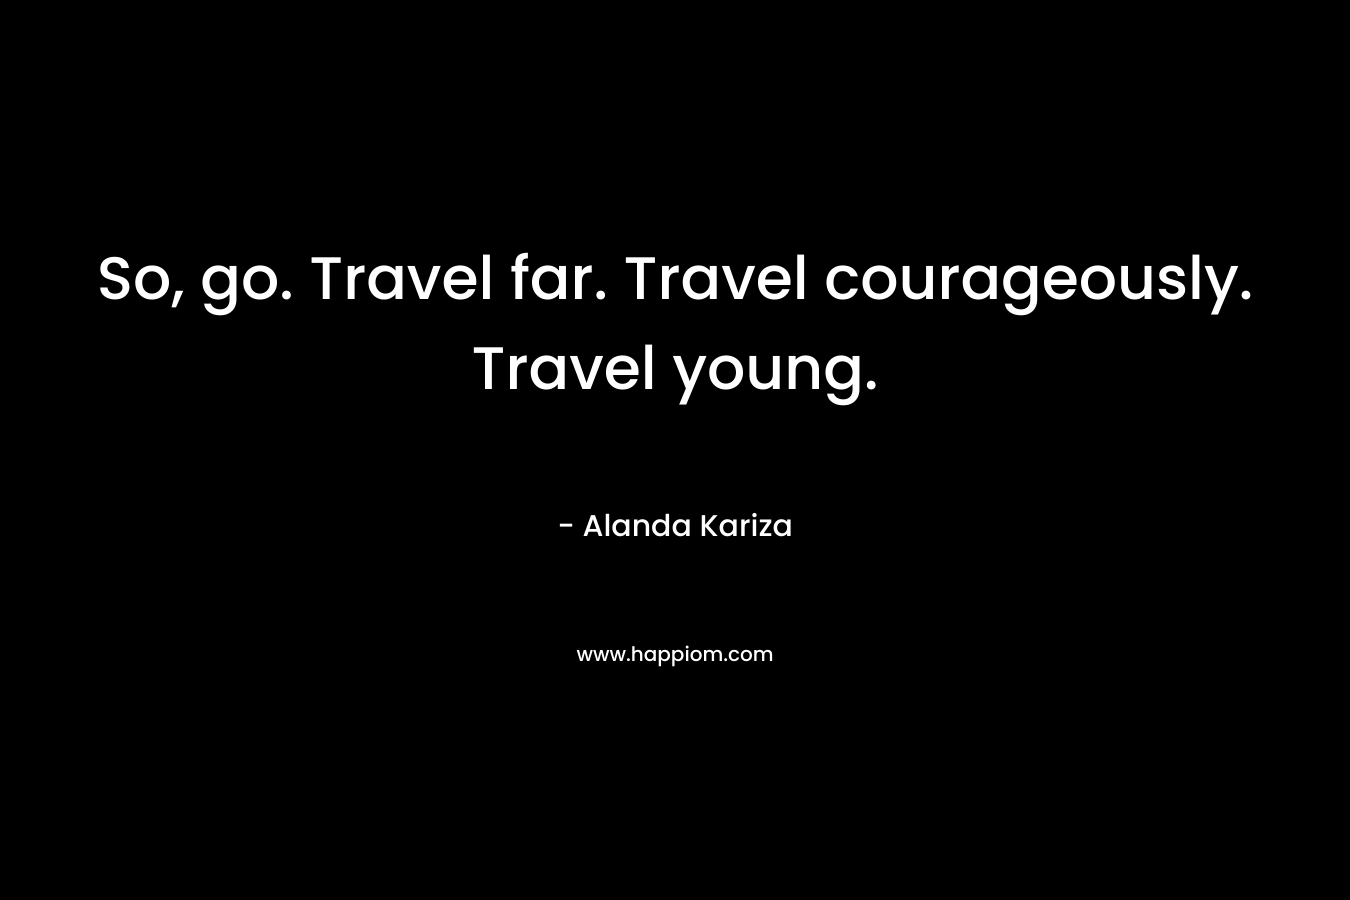 So, go. Travel far. Travel courageously. Travel young.